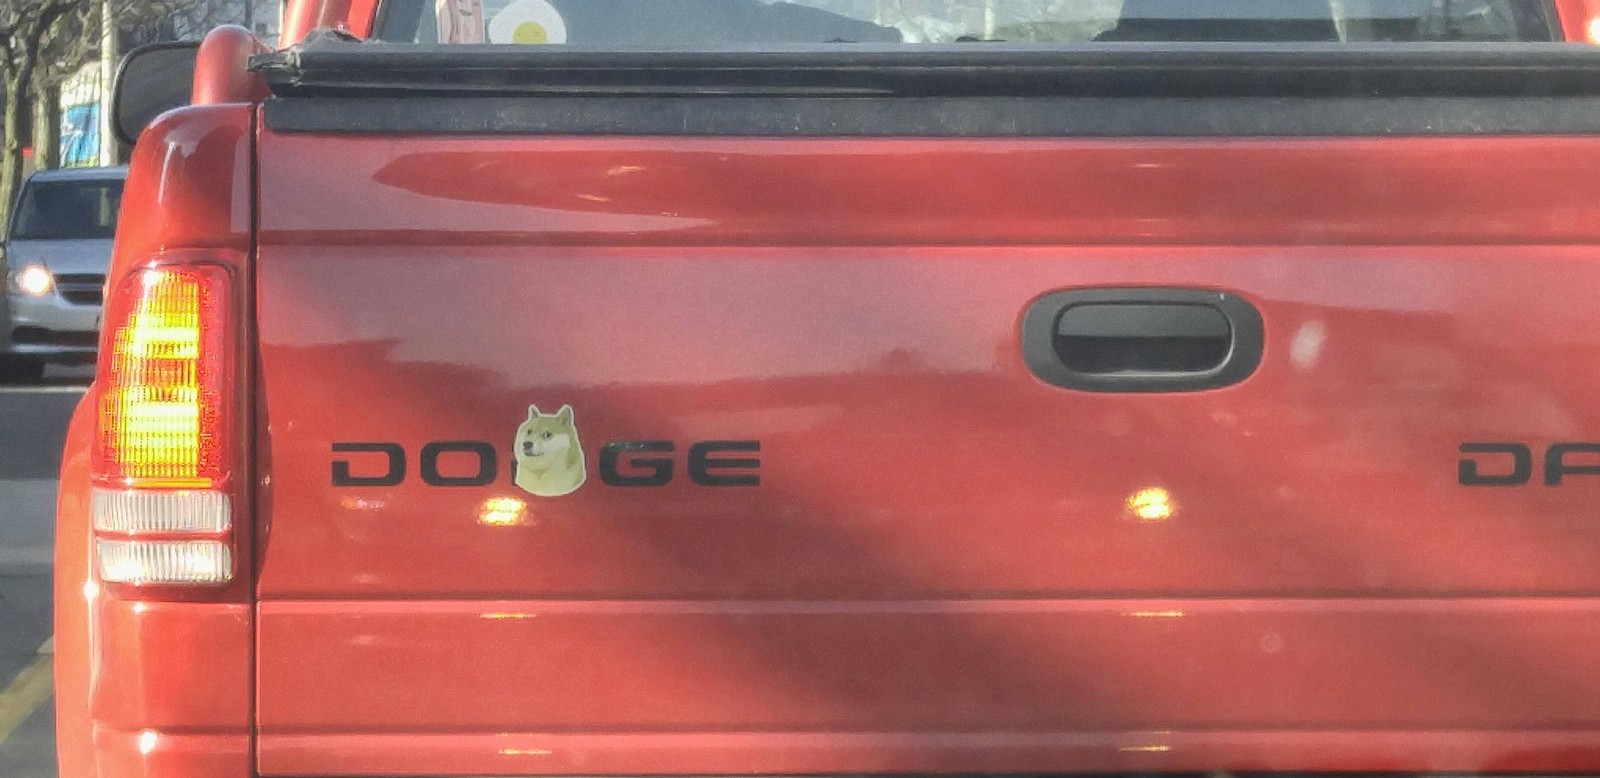 27 Funny Bumper Stickers - Look at the cute Doge. Every Dodge owner should do this!